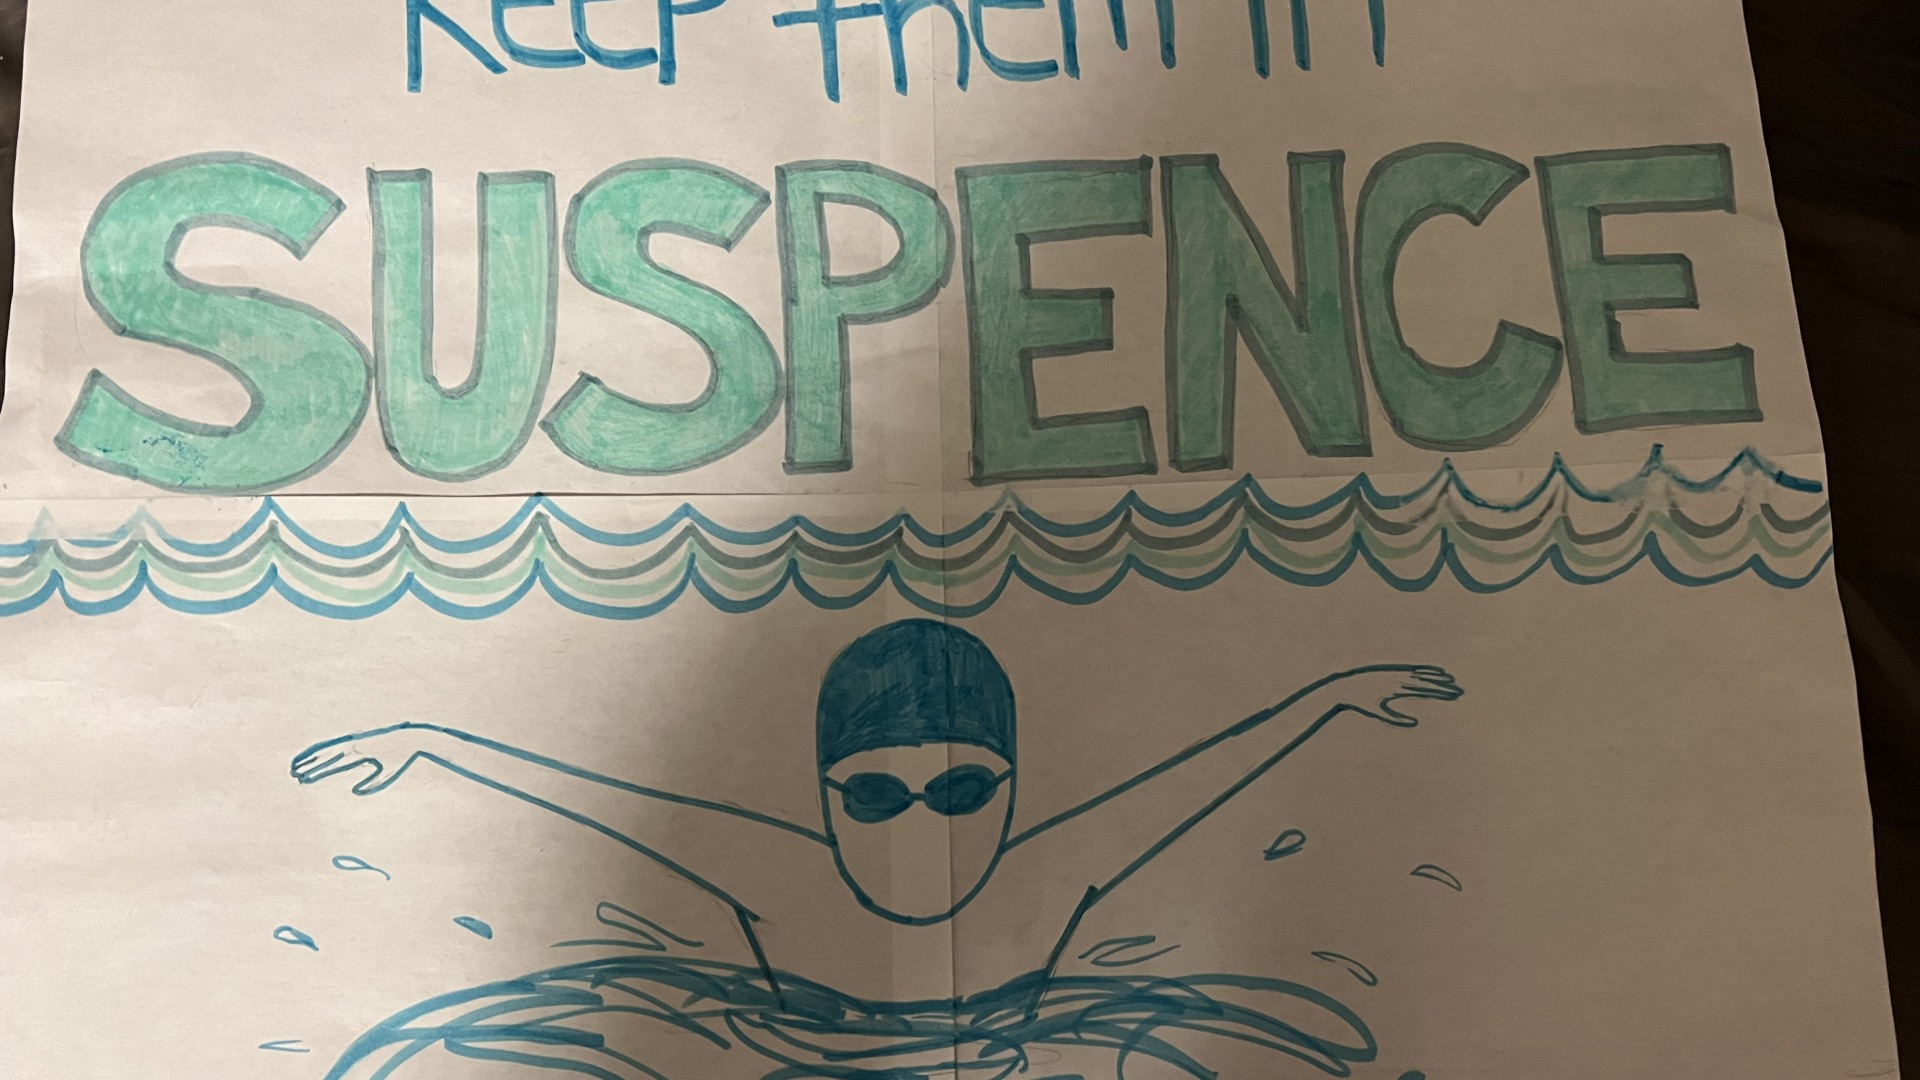 A drawing written in green that says "Keep the Suspence"